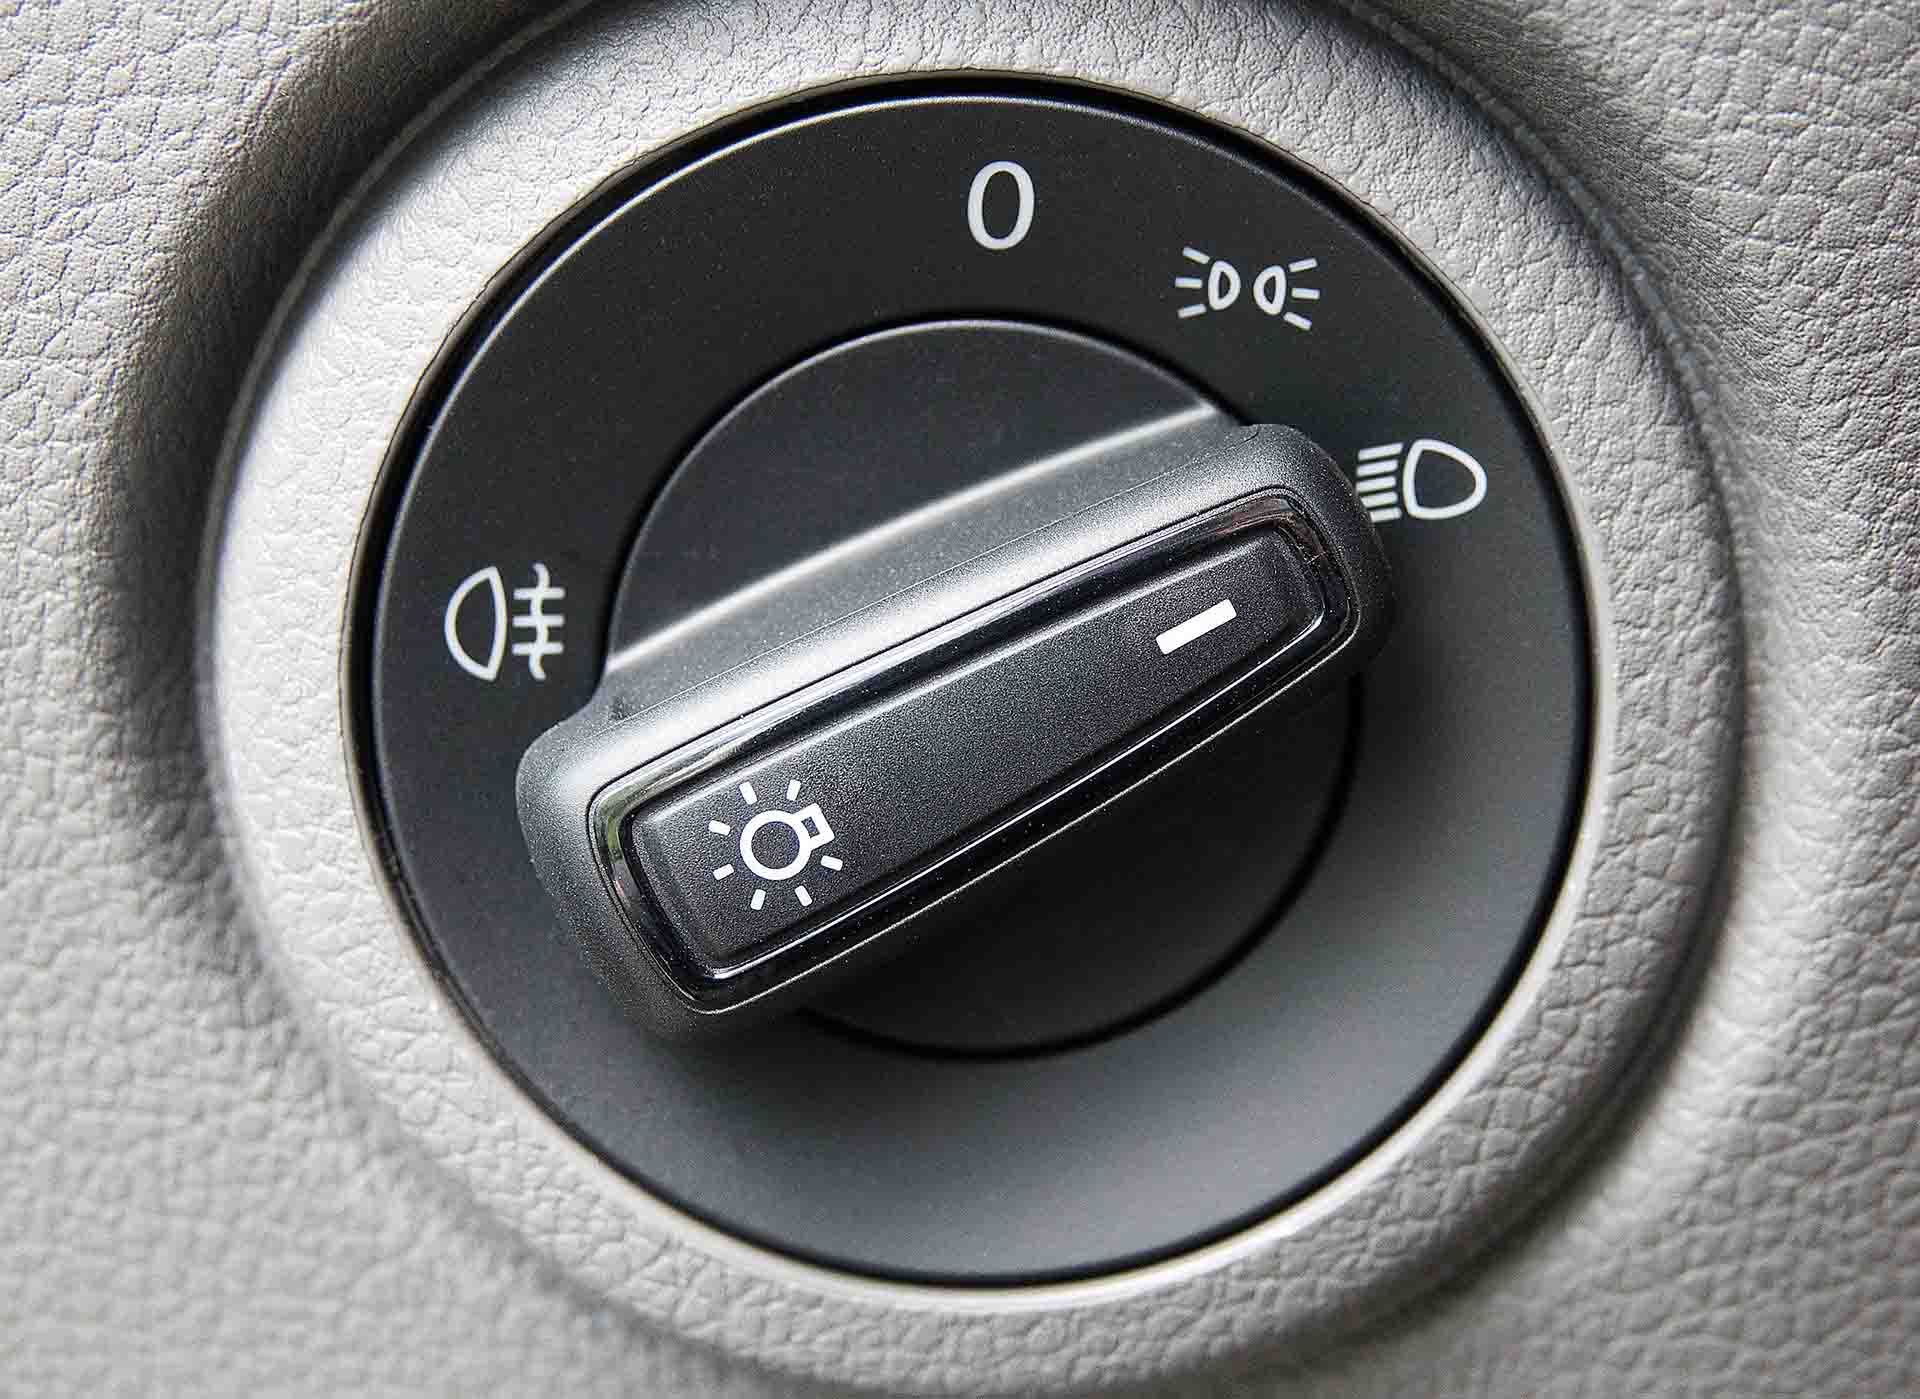 A close-up of a headlight switch dial